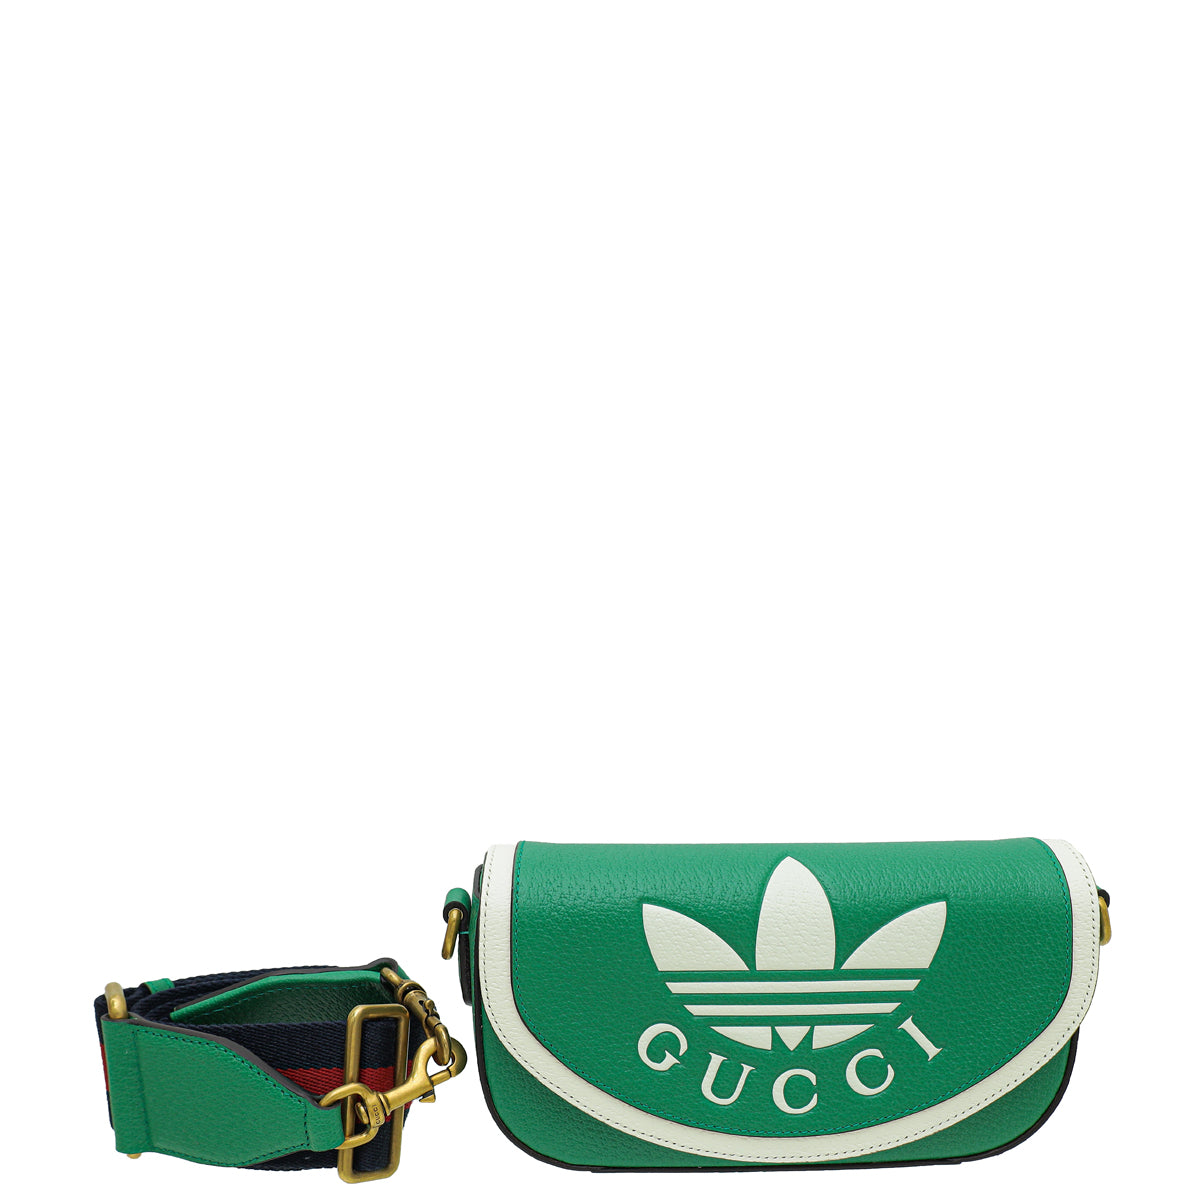 adidas x Gucci Mini Duffel Bag: The collaborative collection f  https://confirmed.onelink.me/mzYA?pid=share&af_dp=adi… | Adidas bags, Bags,  Chanel deauville tote bag